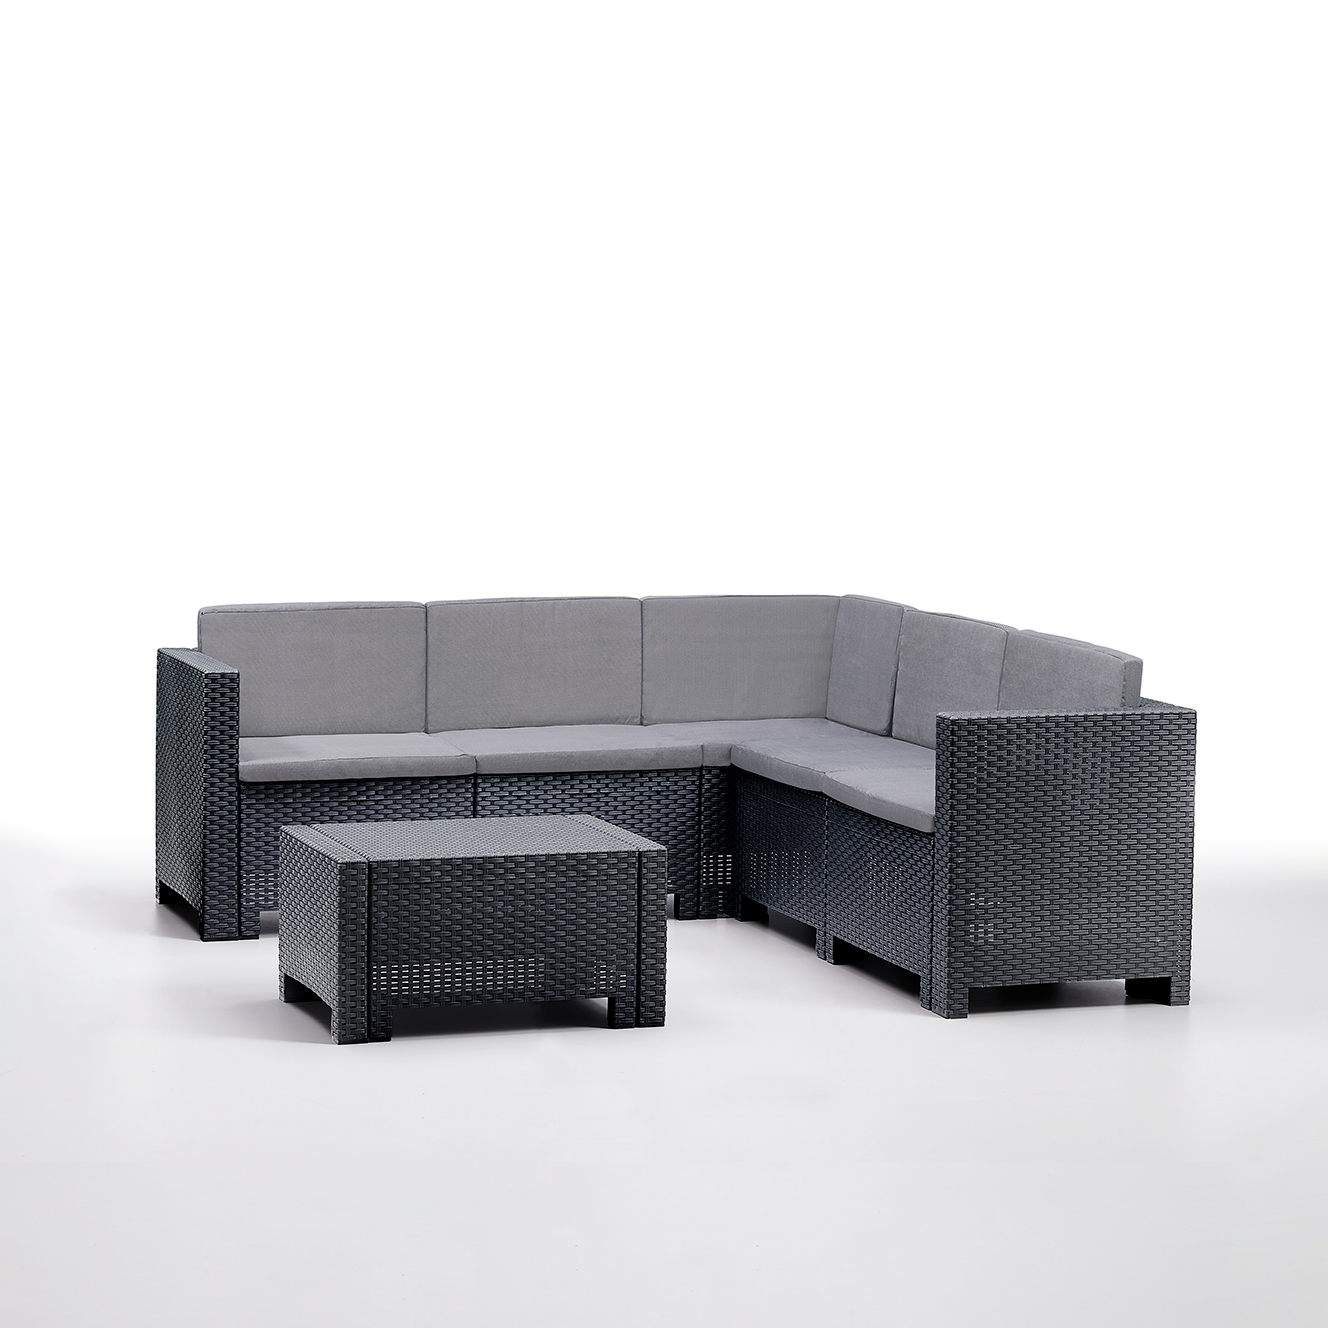 Colorado seats lounge set Made in Italy - BICA S.p.A.